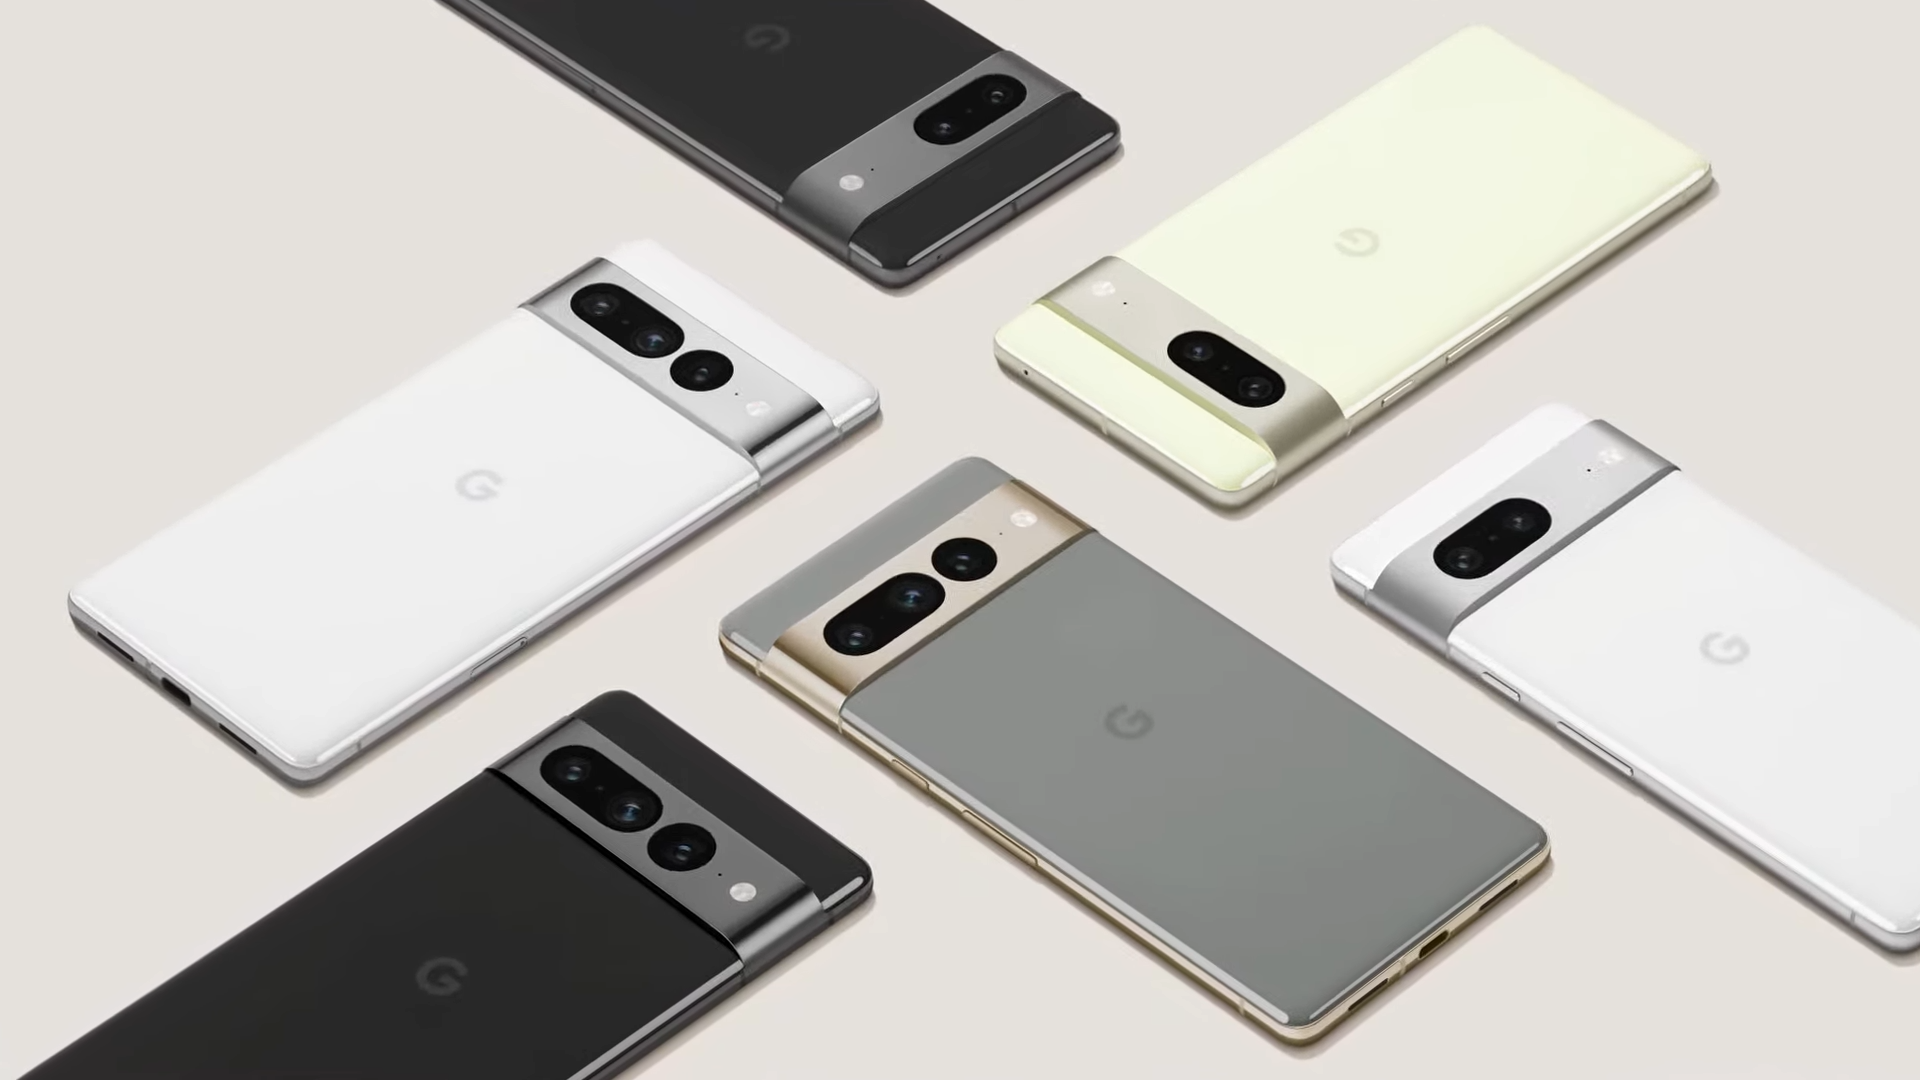 Google tried to promote the Pixel 7 on Tim Cook's social media, but embarrassed itself by doing so with an Apple smartphone